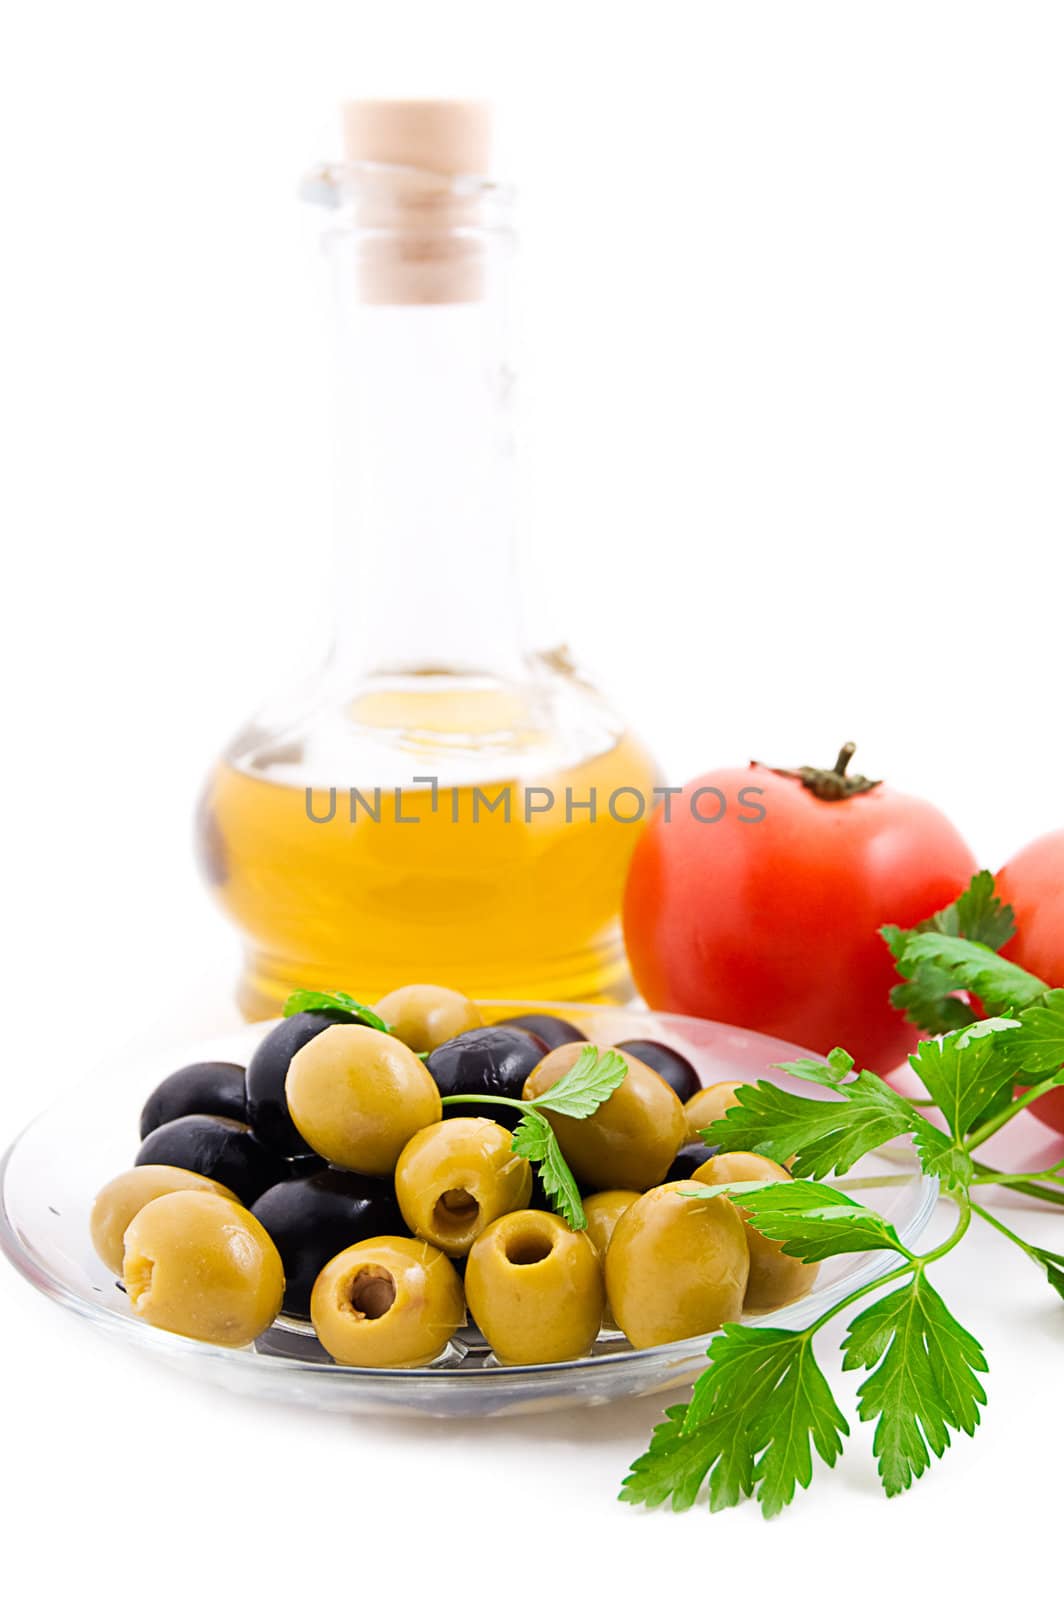 Olives and tomatoes by Angel_a